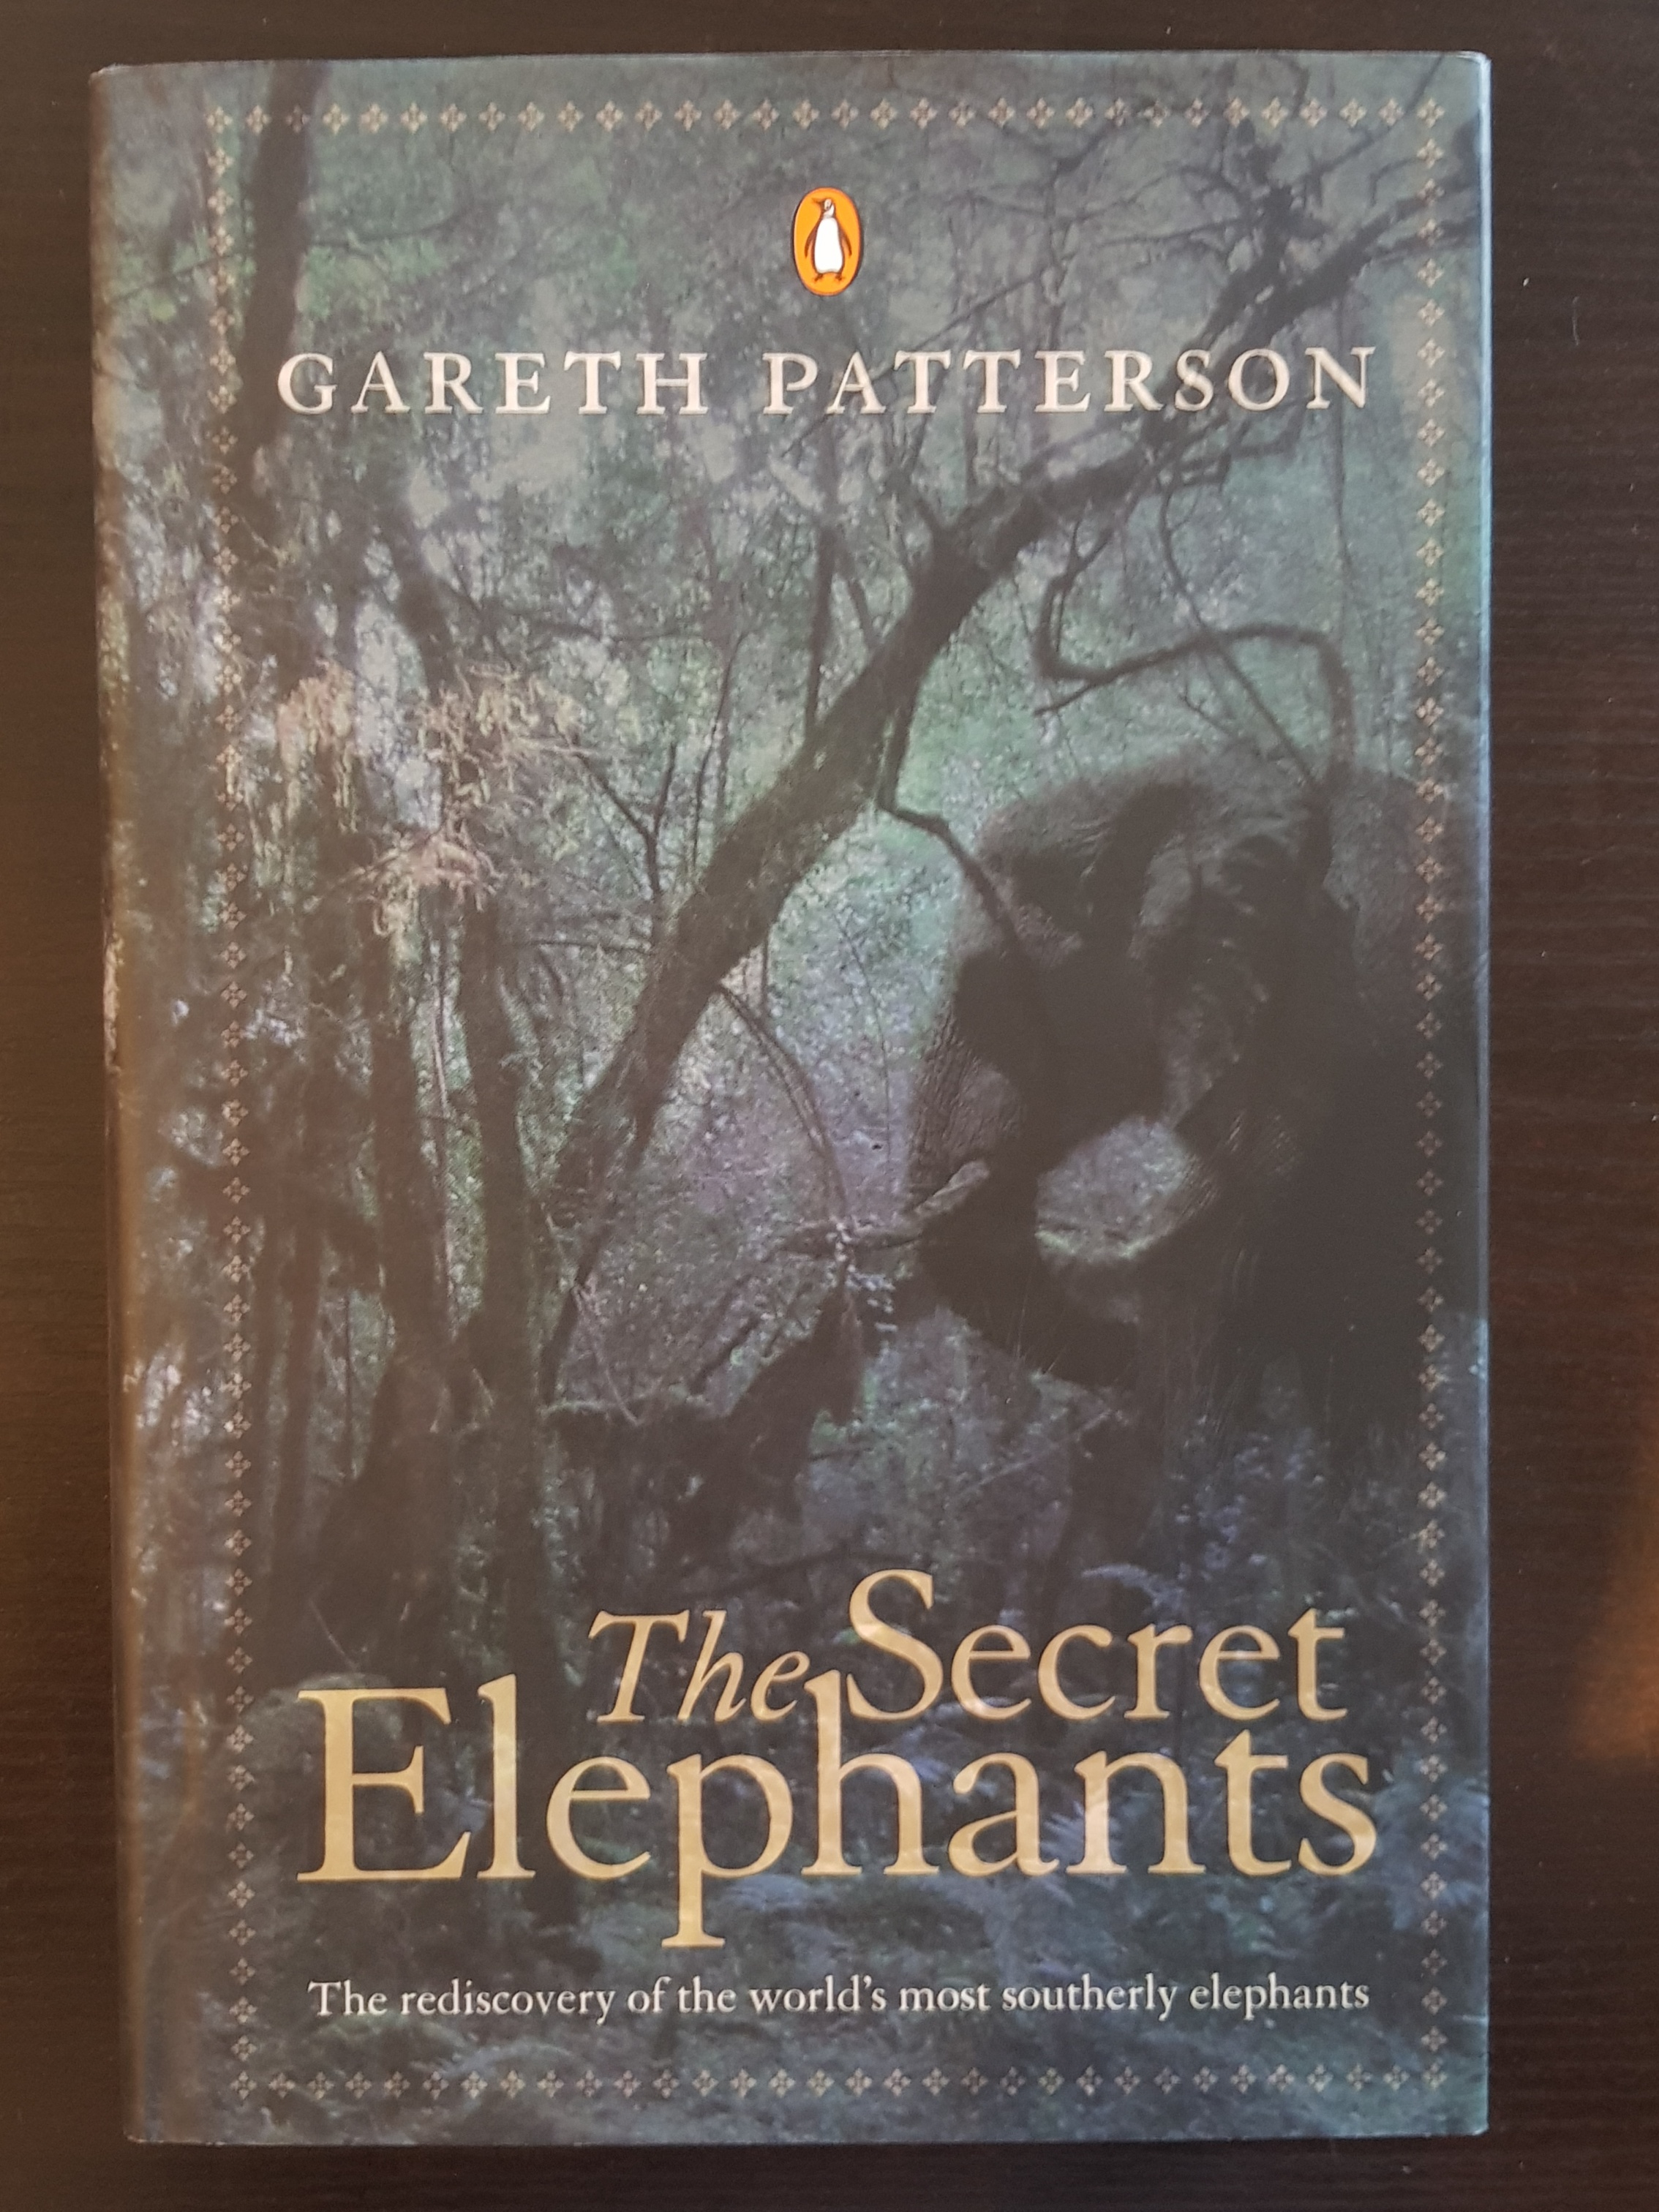 The Secret Elephants The Rediscovery Of The Worlds Most Southerly
Elephants